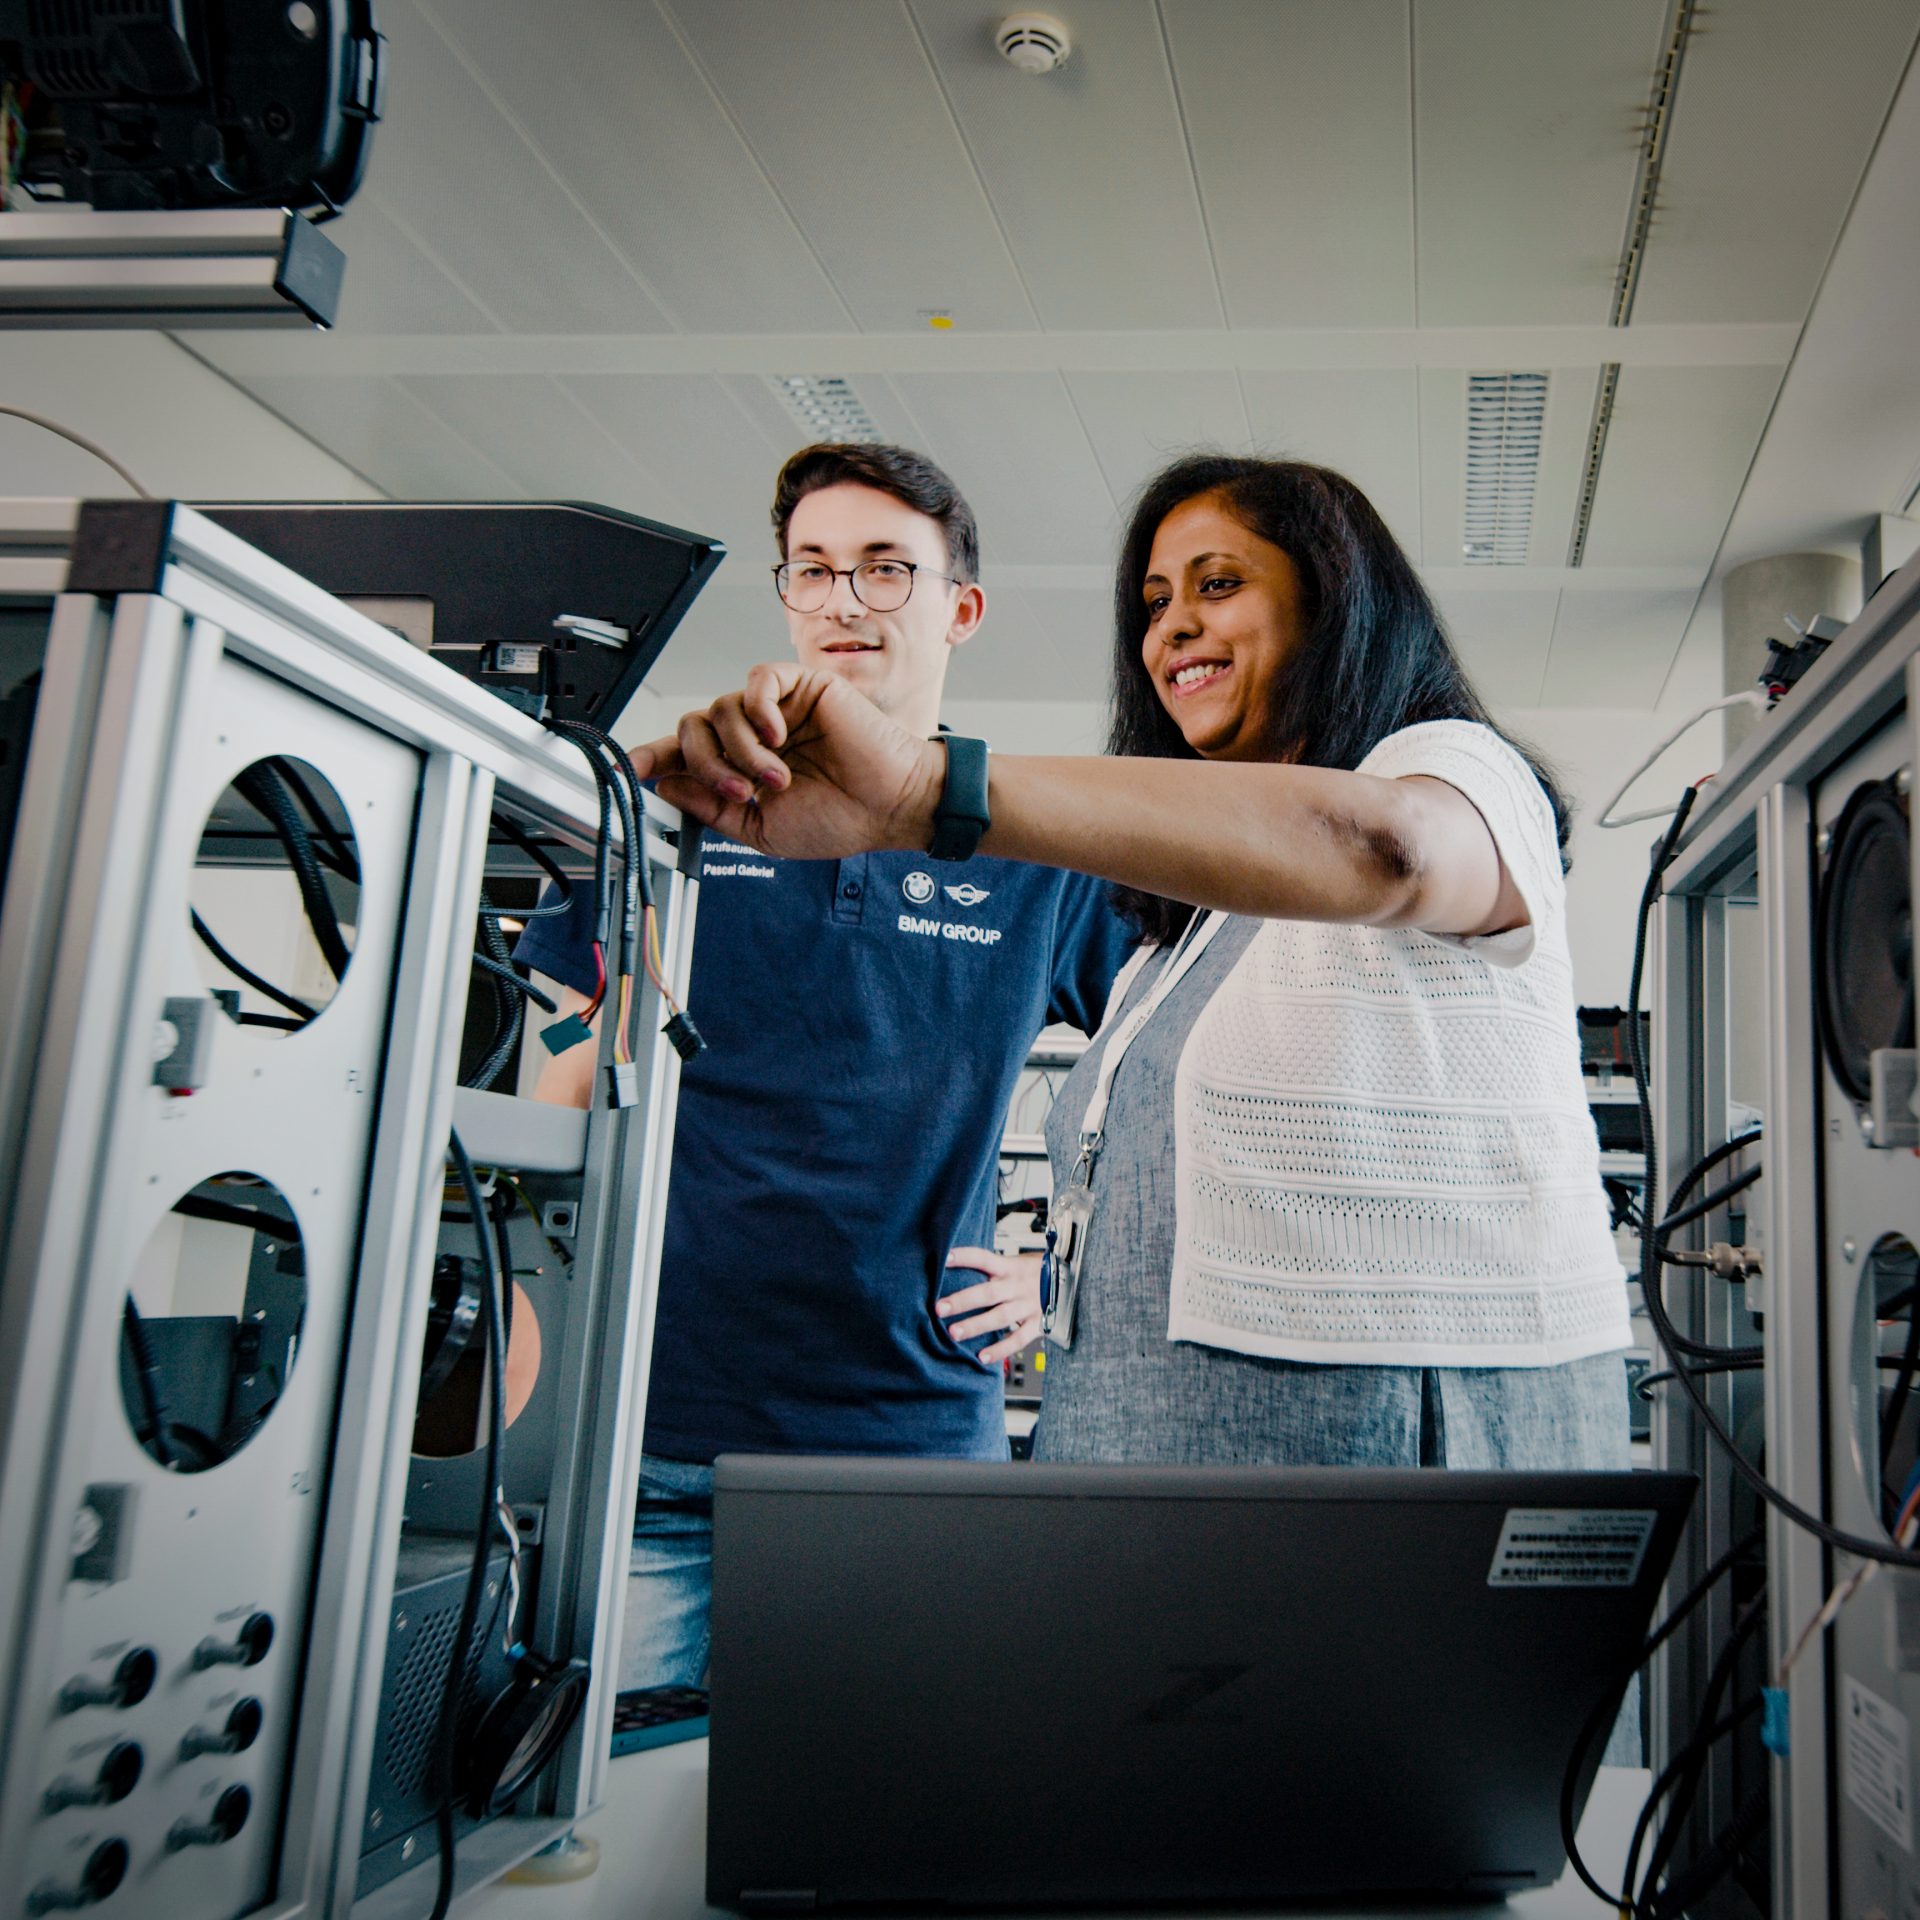 The image shows Nisha in exchange with a colleague at a test rack.